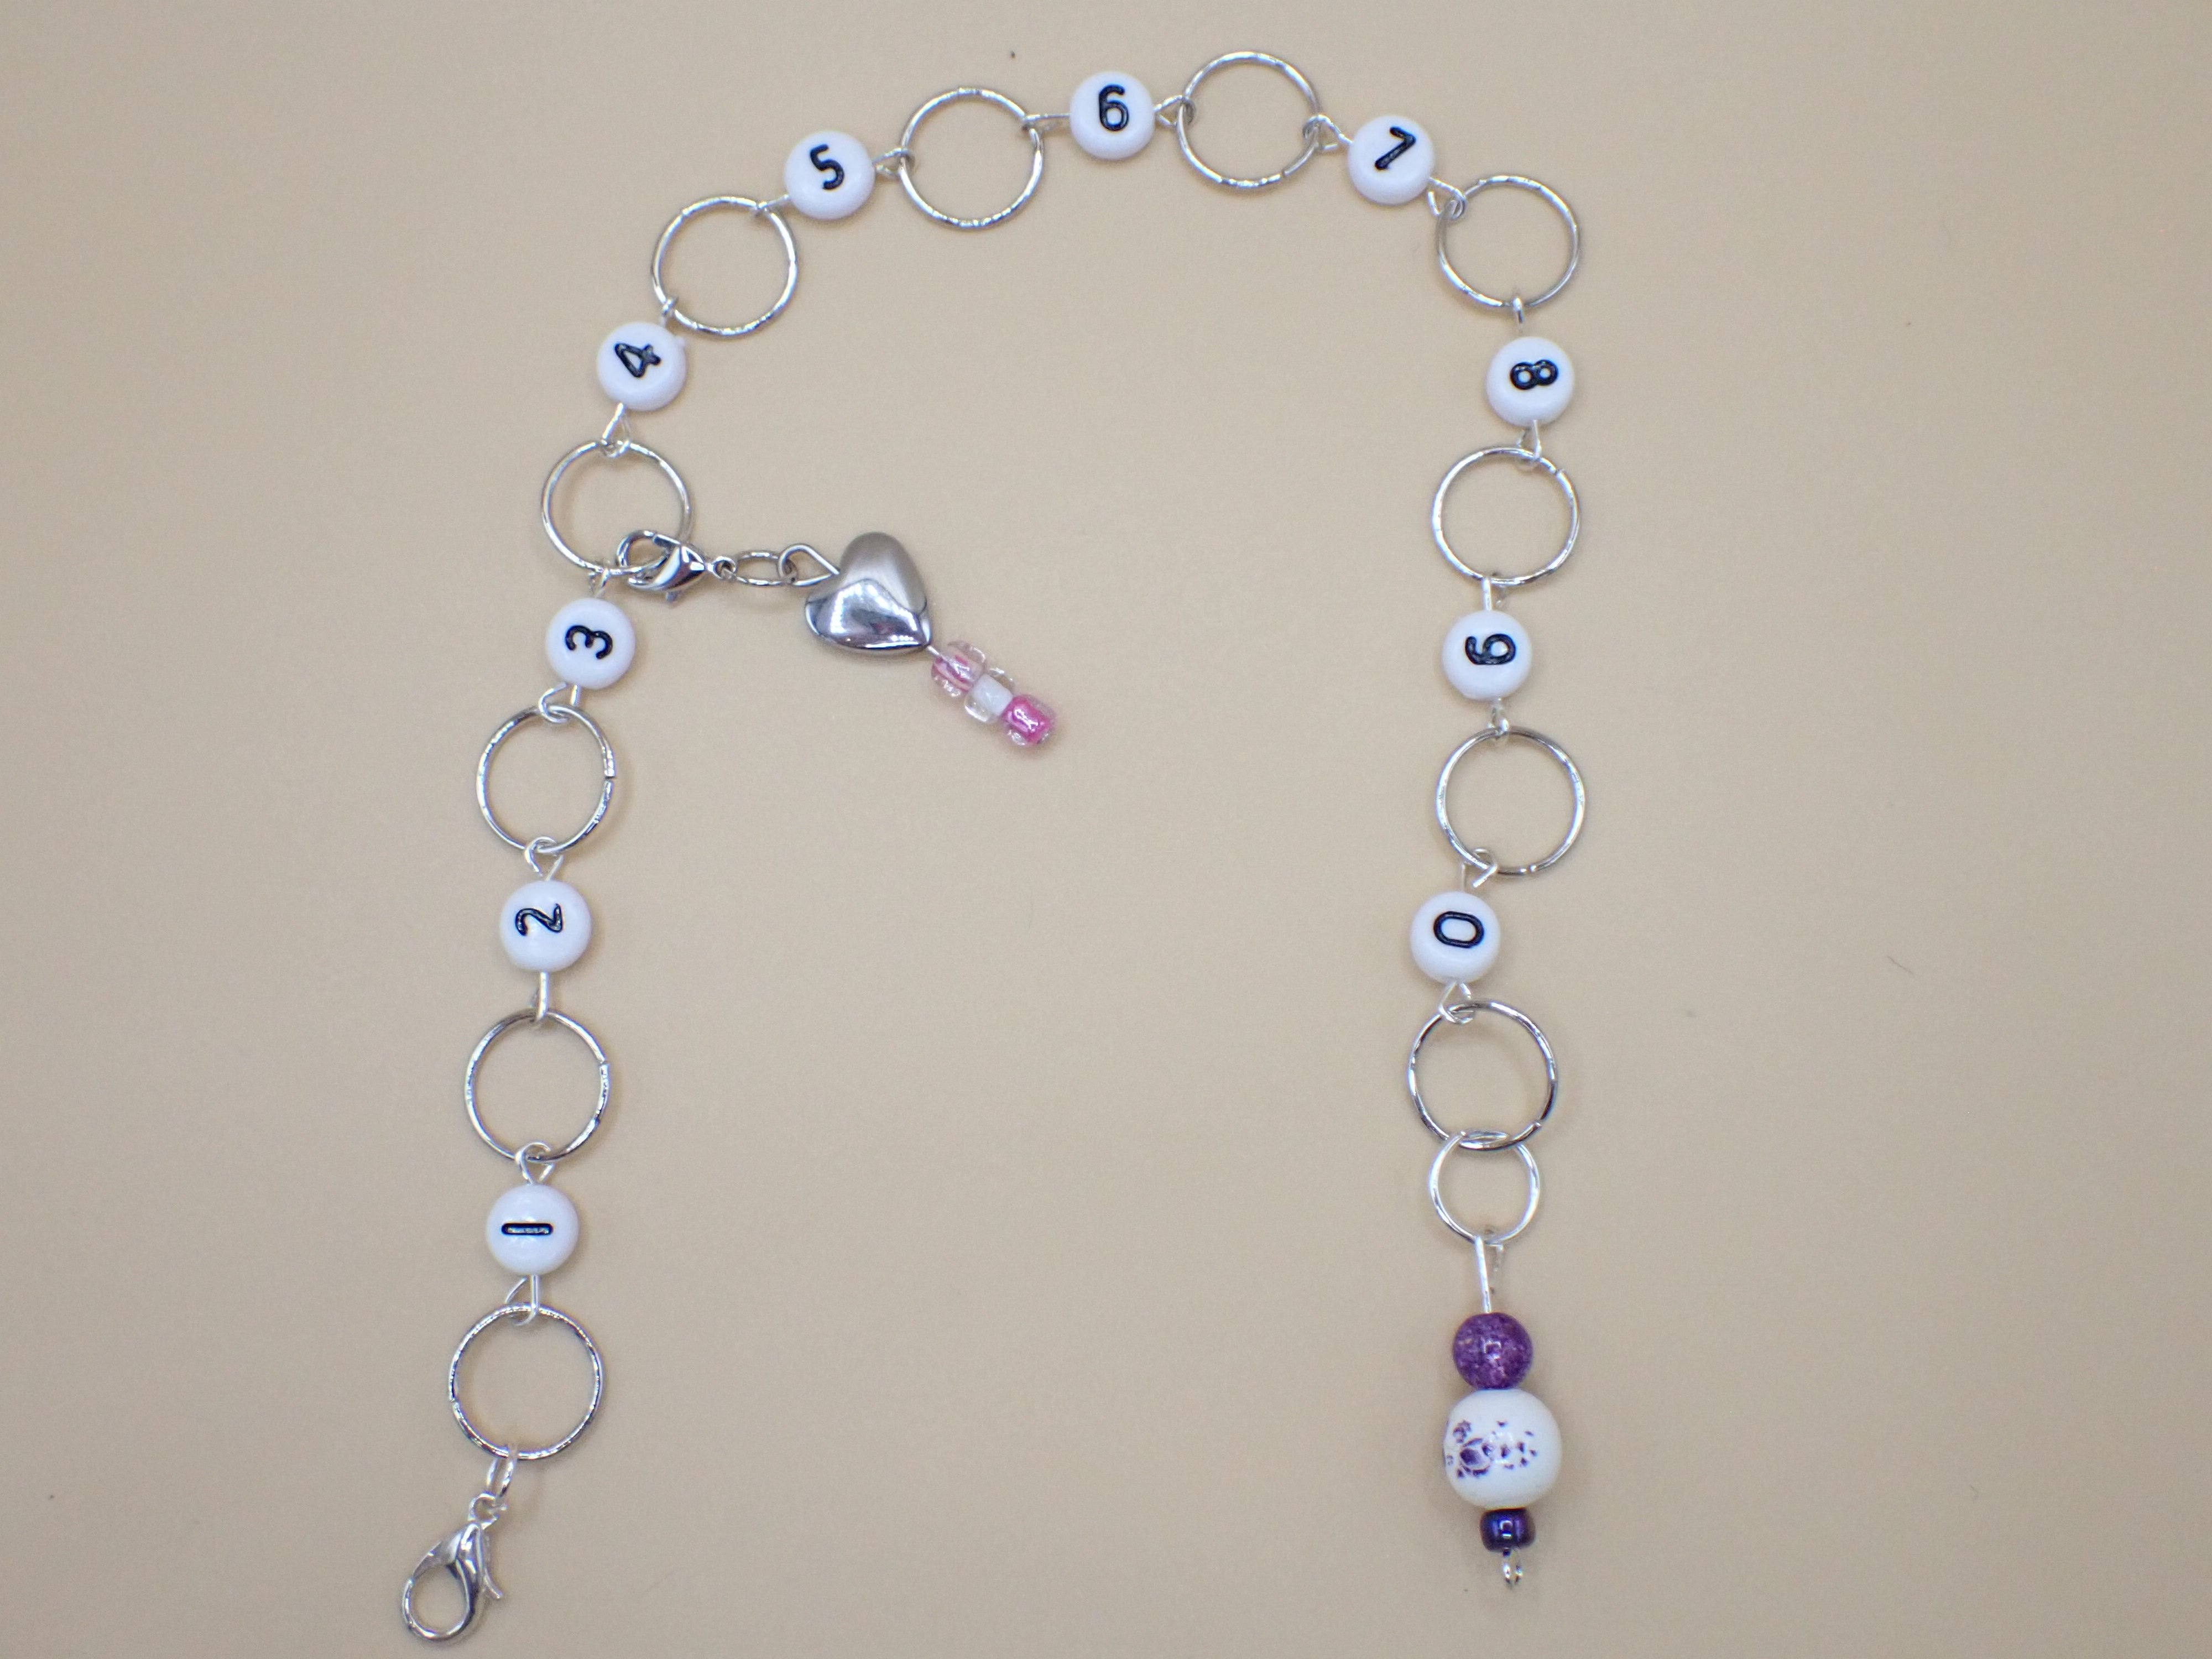 Row Counter Chain for Knit or Crochet, with Small Purple Flowers on White  Bead